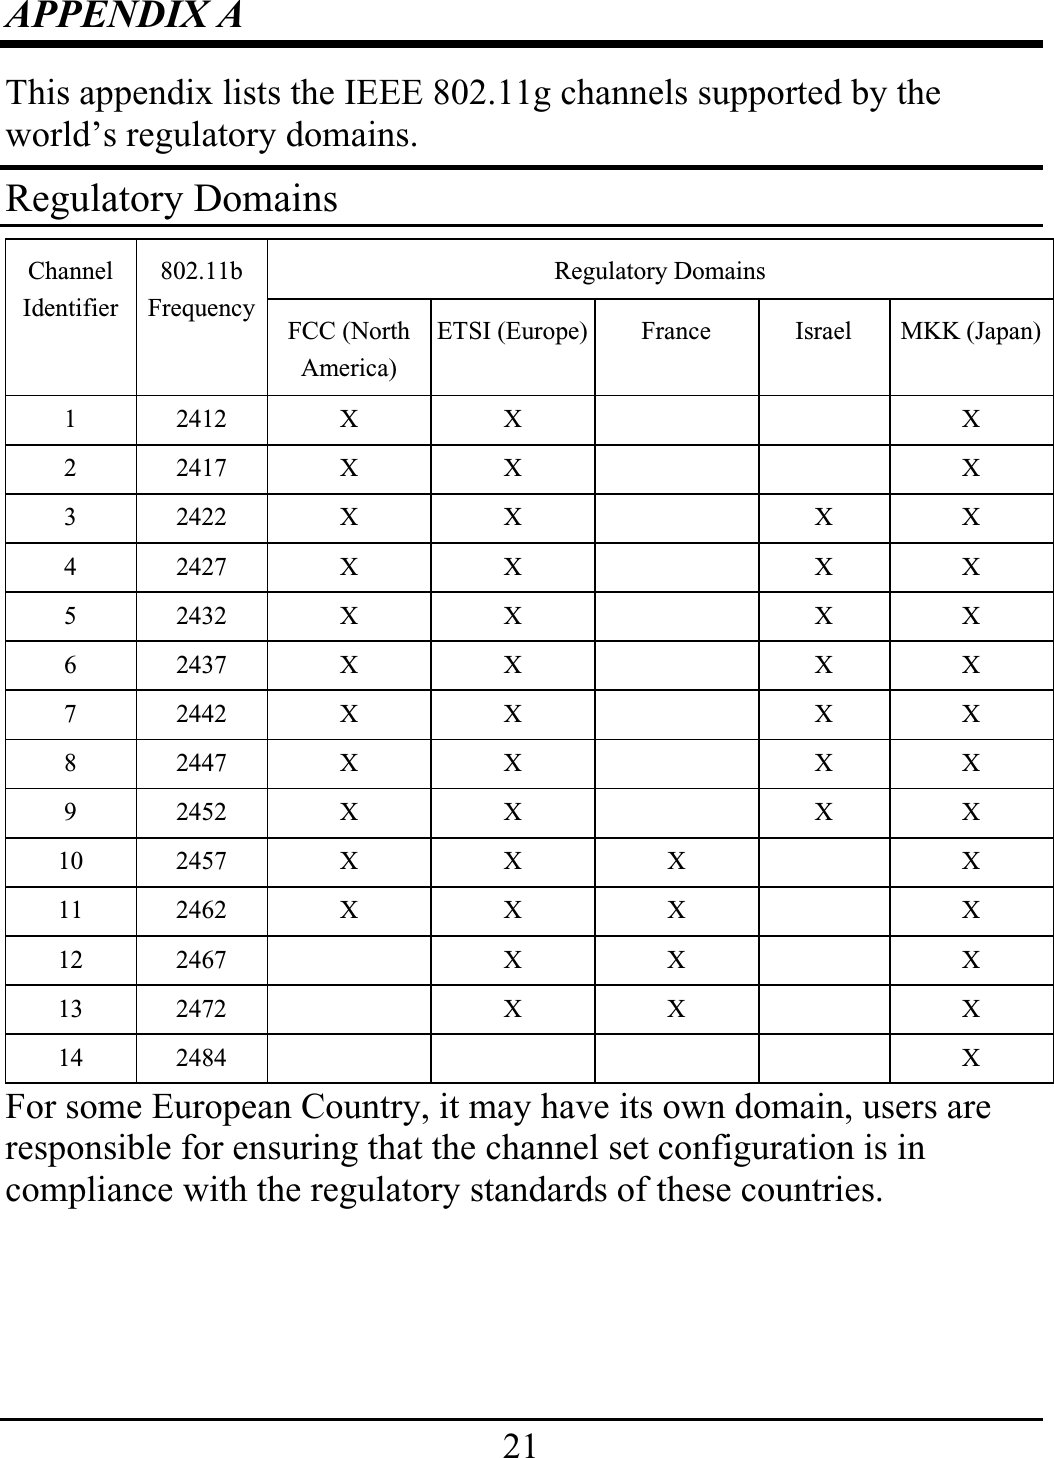 21APPENDIX A This appendix lists the IEEE 802.11g channels supported by the world’s regulatory domains. Regulatory Domains Regulatory Domains ChannelIdentifier 802.11b Frequency FCC (North America) ETSI (Europe) France  Israel  MKK (Japan)1 2412  X  X      X 2 2417  X  X      X 3 2422  X  X    X  X 4 2427  X  X    X  X 5 2432  X  X    X  X 6 2437  X  X    X  X 7 2442  X  X    X  X 8 2447  X  X    X  X 9 2452  X  X    X  X 10 2457 X X X  X 11 2462 X X X  X 12 2467    X  X    X 13 2472    X  X    X 14 2484     X For some European Country, it may have its own domain, users are responsible for ensuring that the channel set configuration is in compliance with the regulatory standards of these countries. 